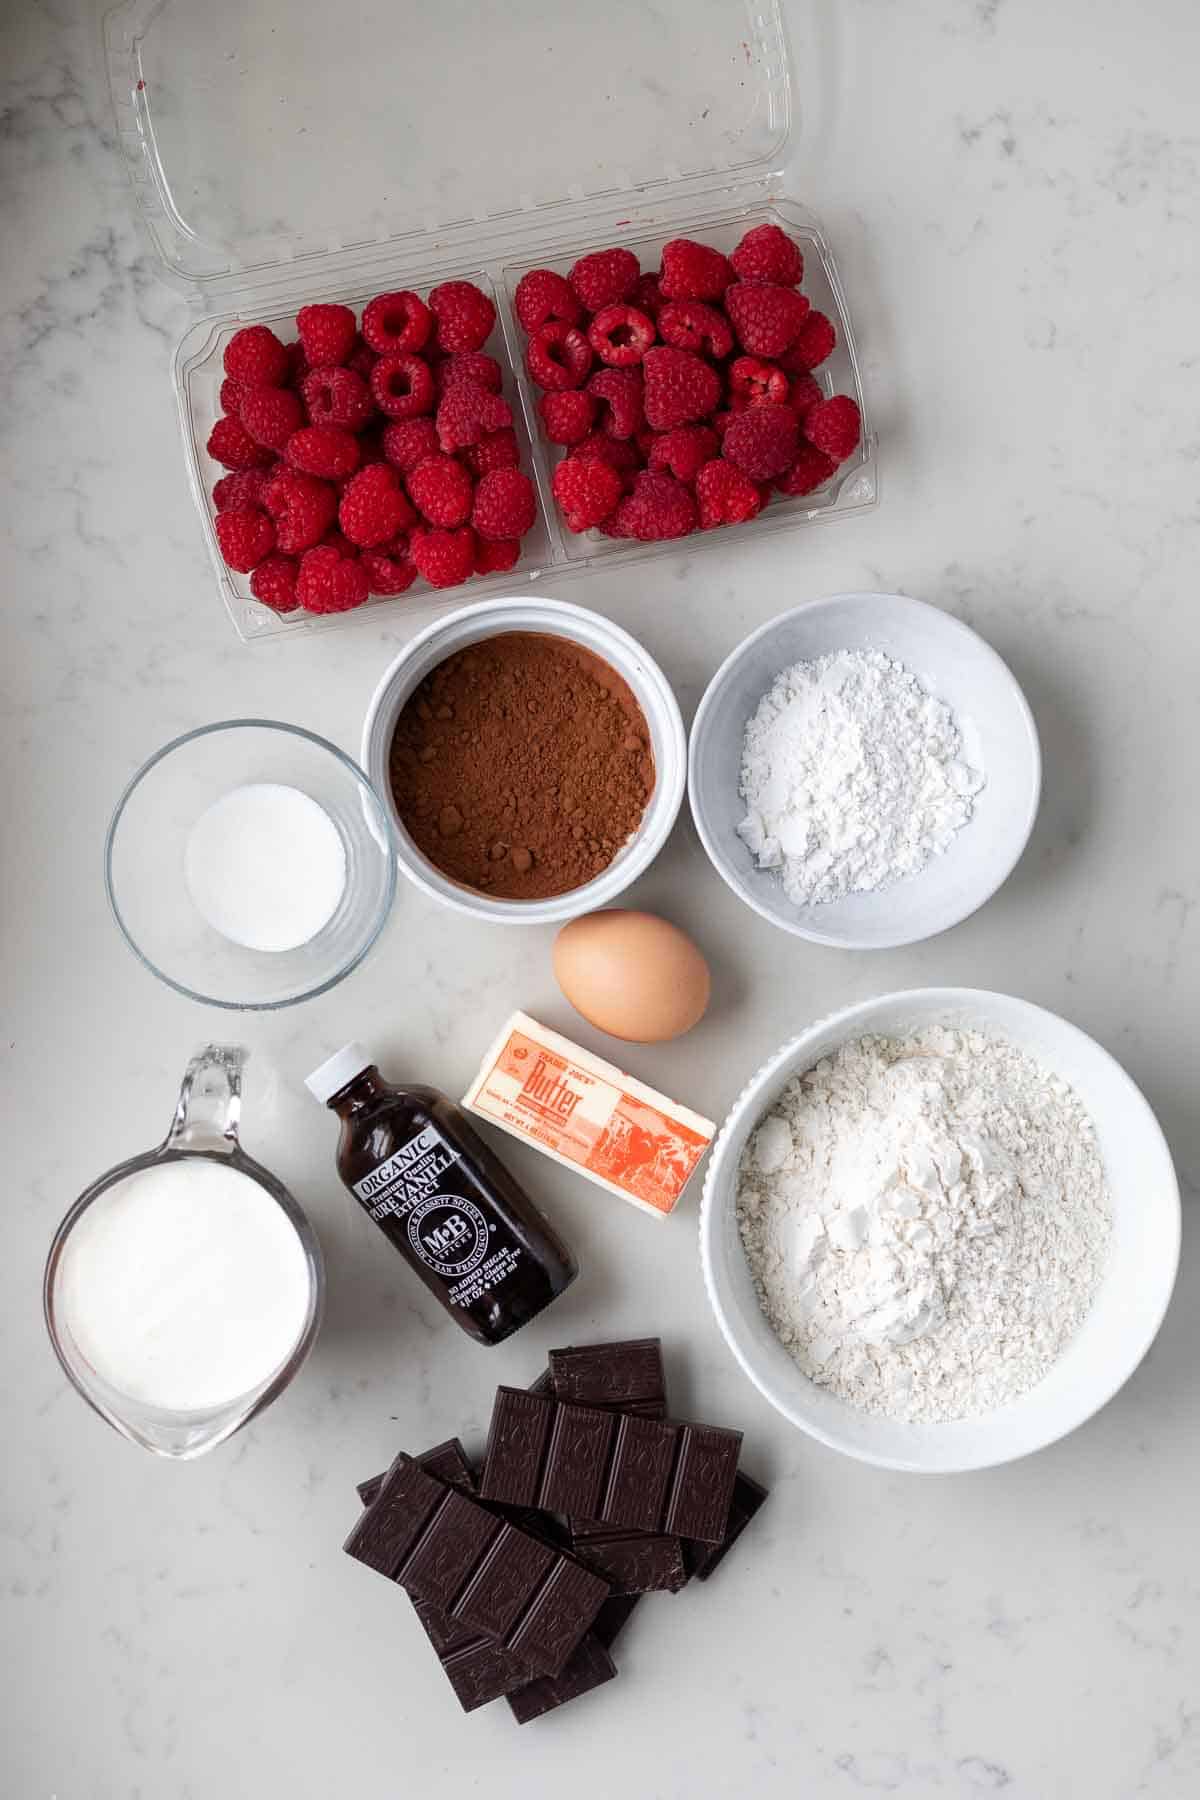 Chocolate raspberry tart ingredients on a white counter.